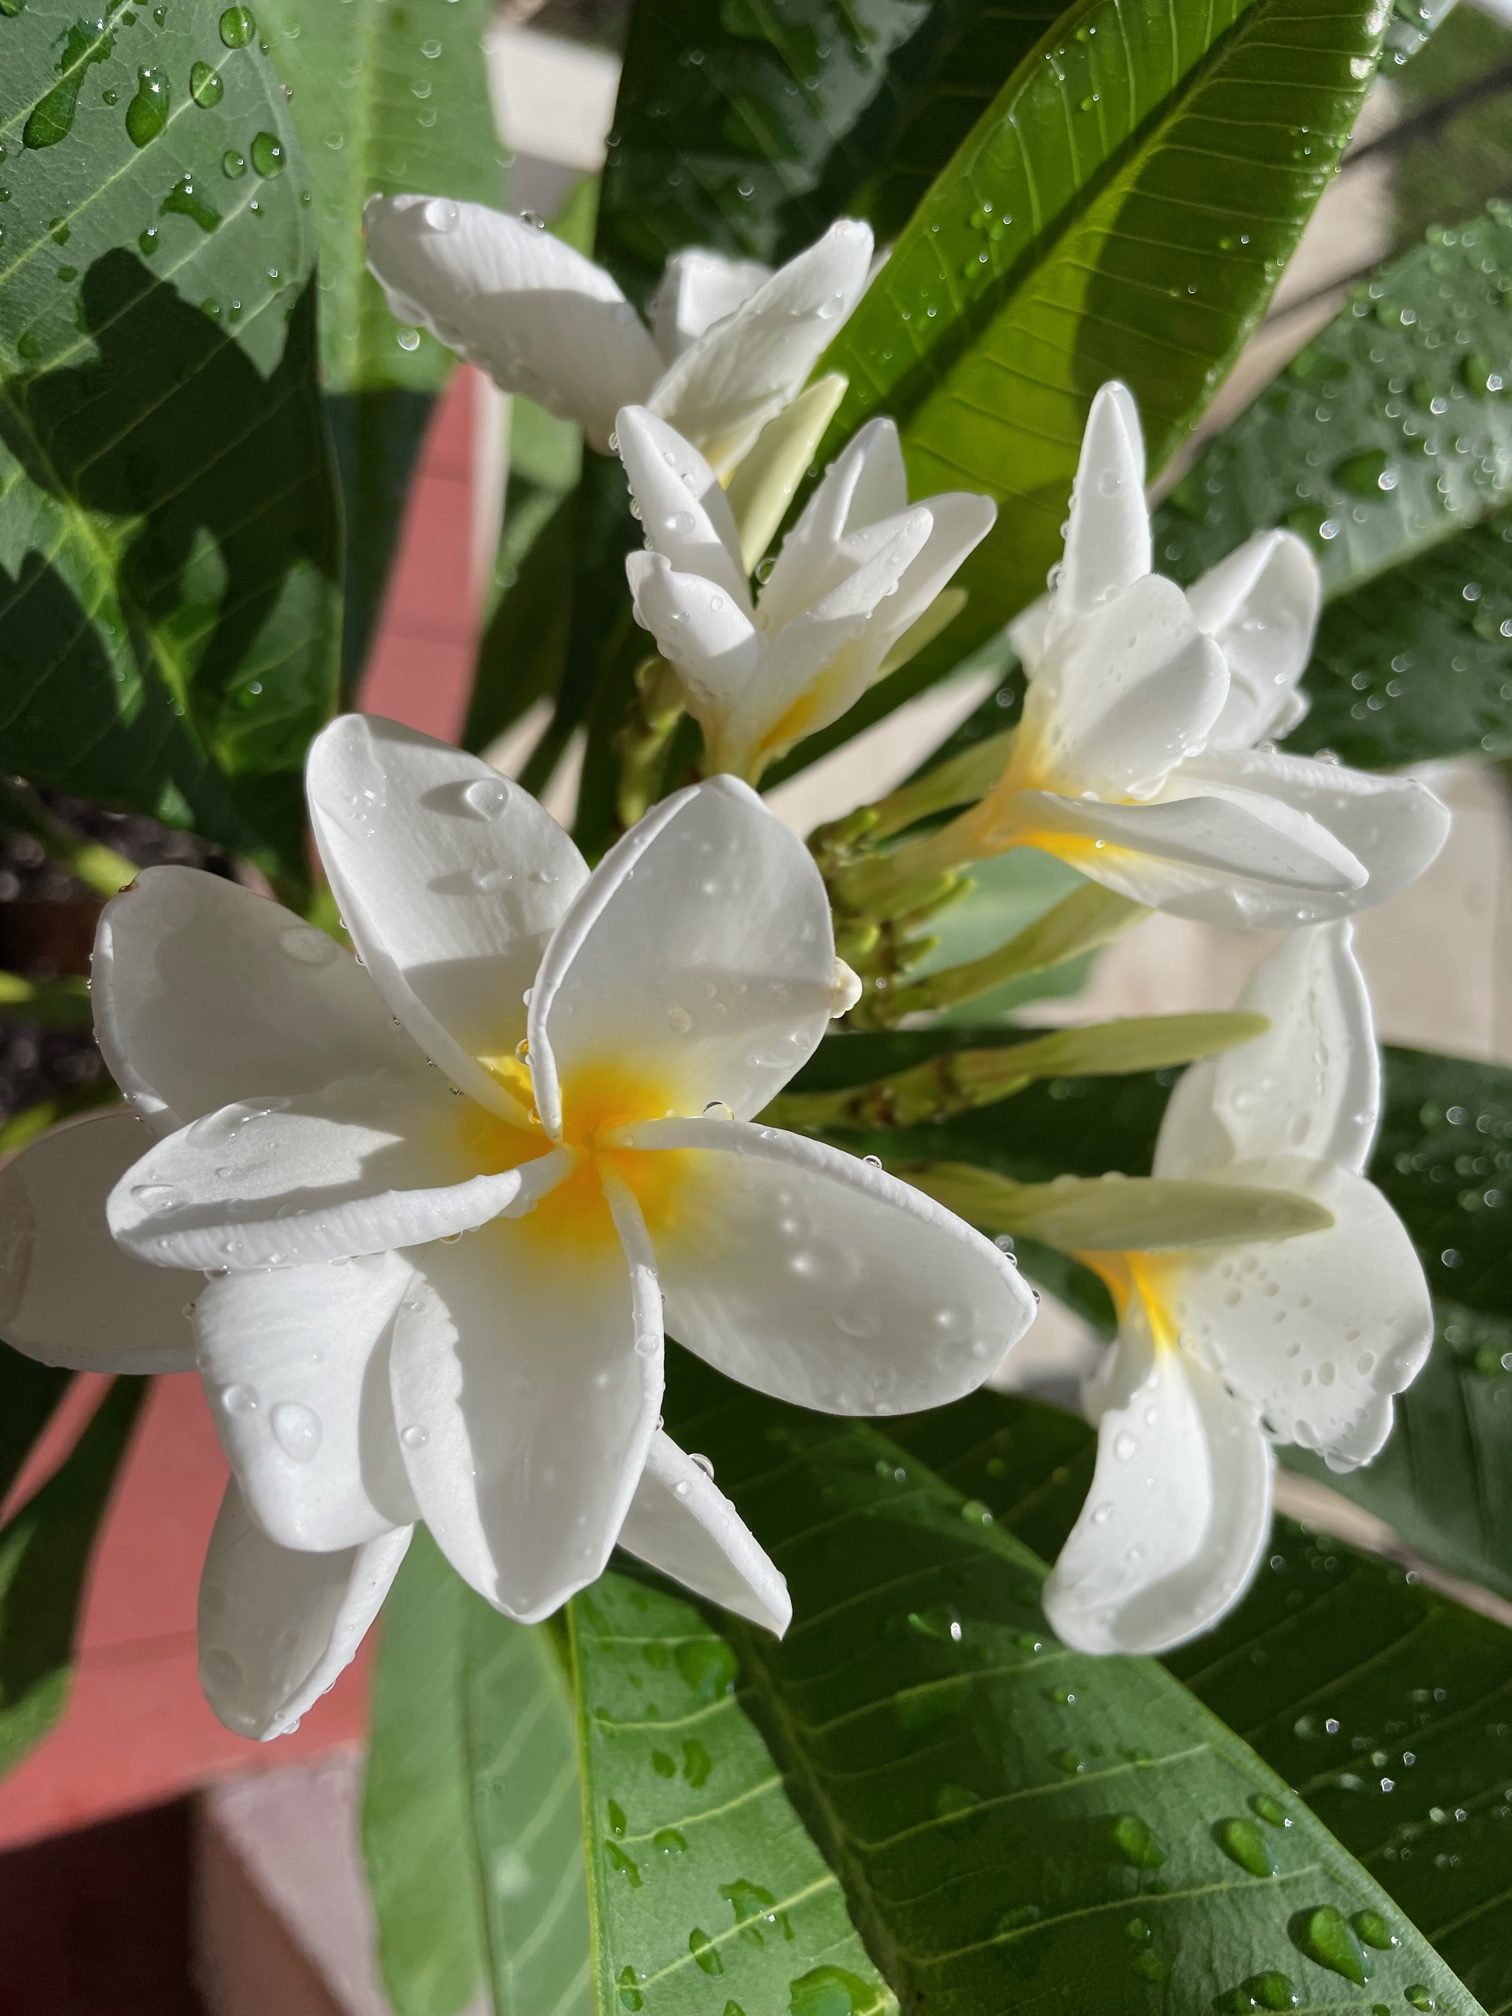 A close-up shot of white plumeria flowers with yellow centers, covered in dewdrops and shining in the sun. Green leaves and a pink background are out of focus behind the flowers.